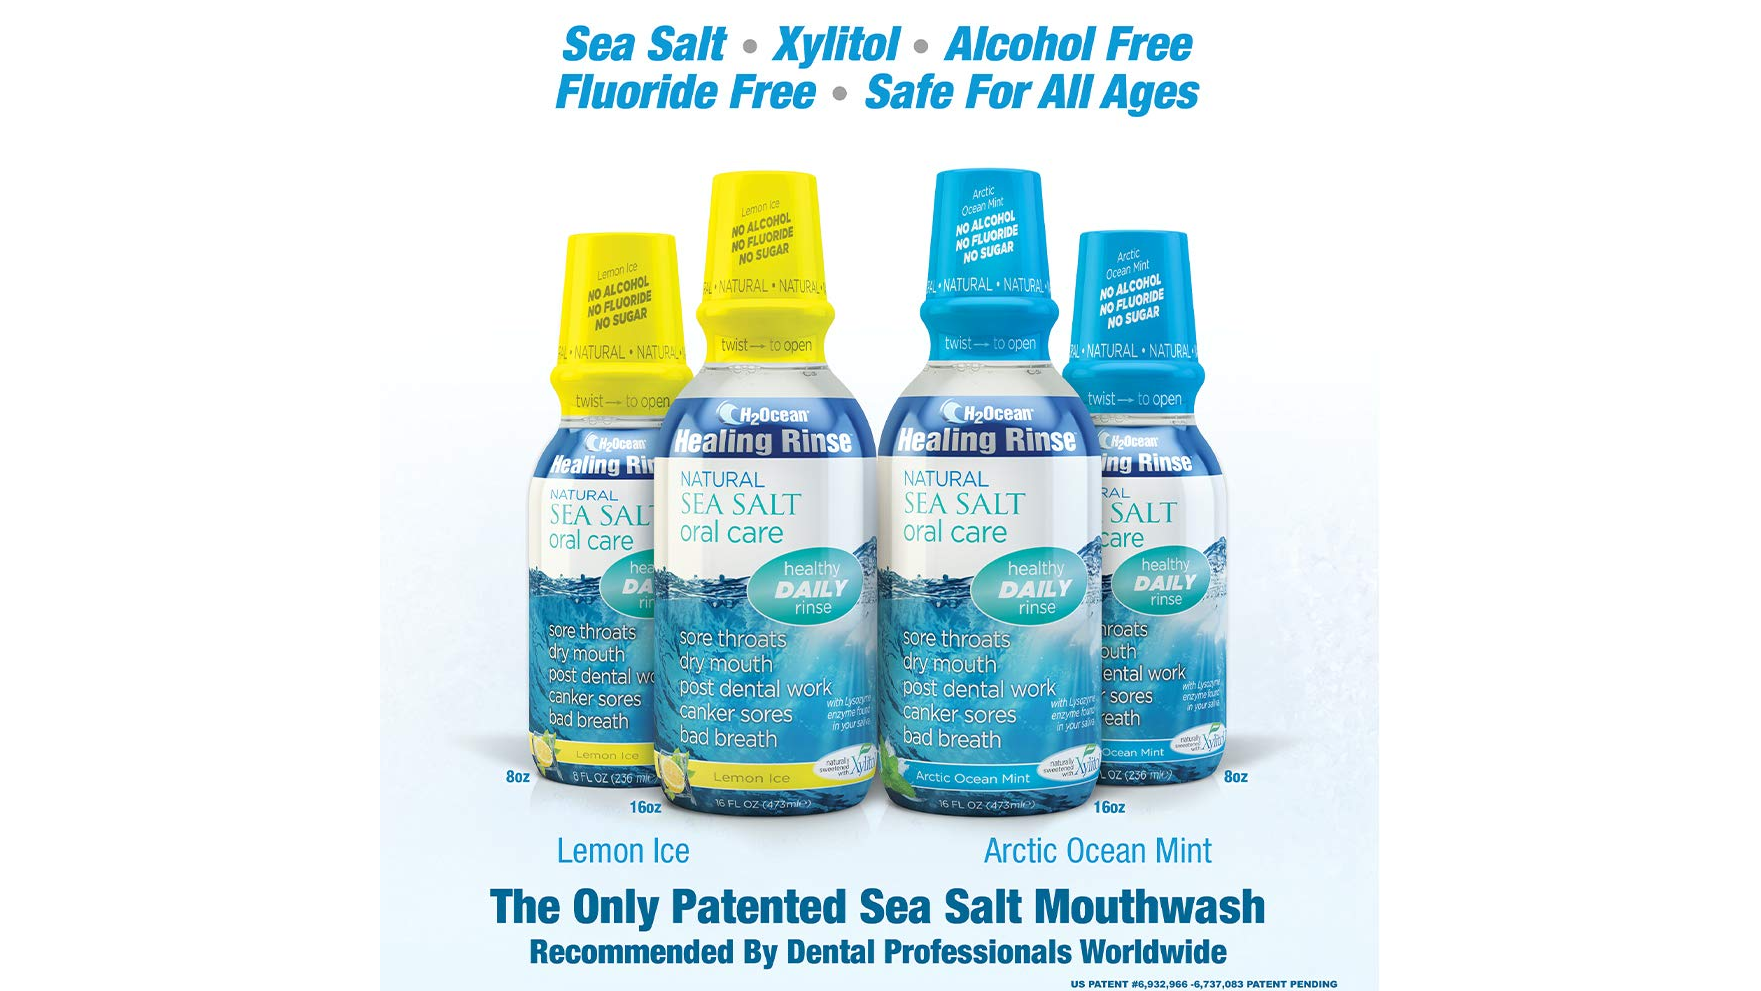 Get This #1 Dentist Recommended Sea Salt Oral Rinse To Soothe A Sore Throat